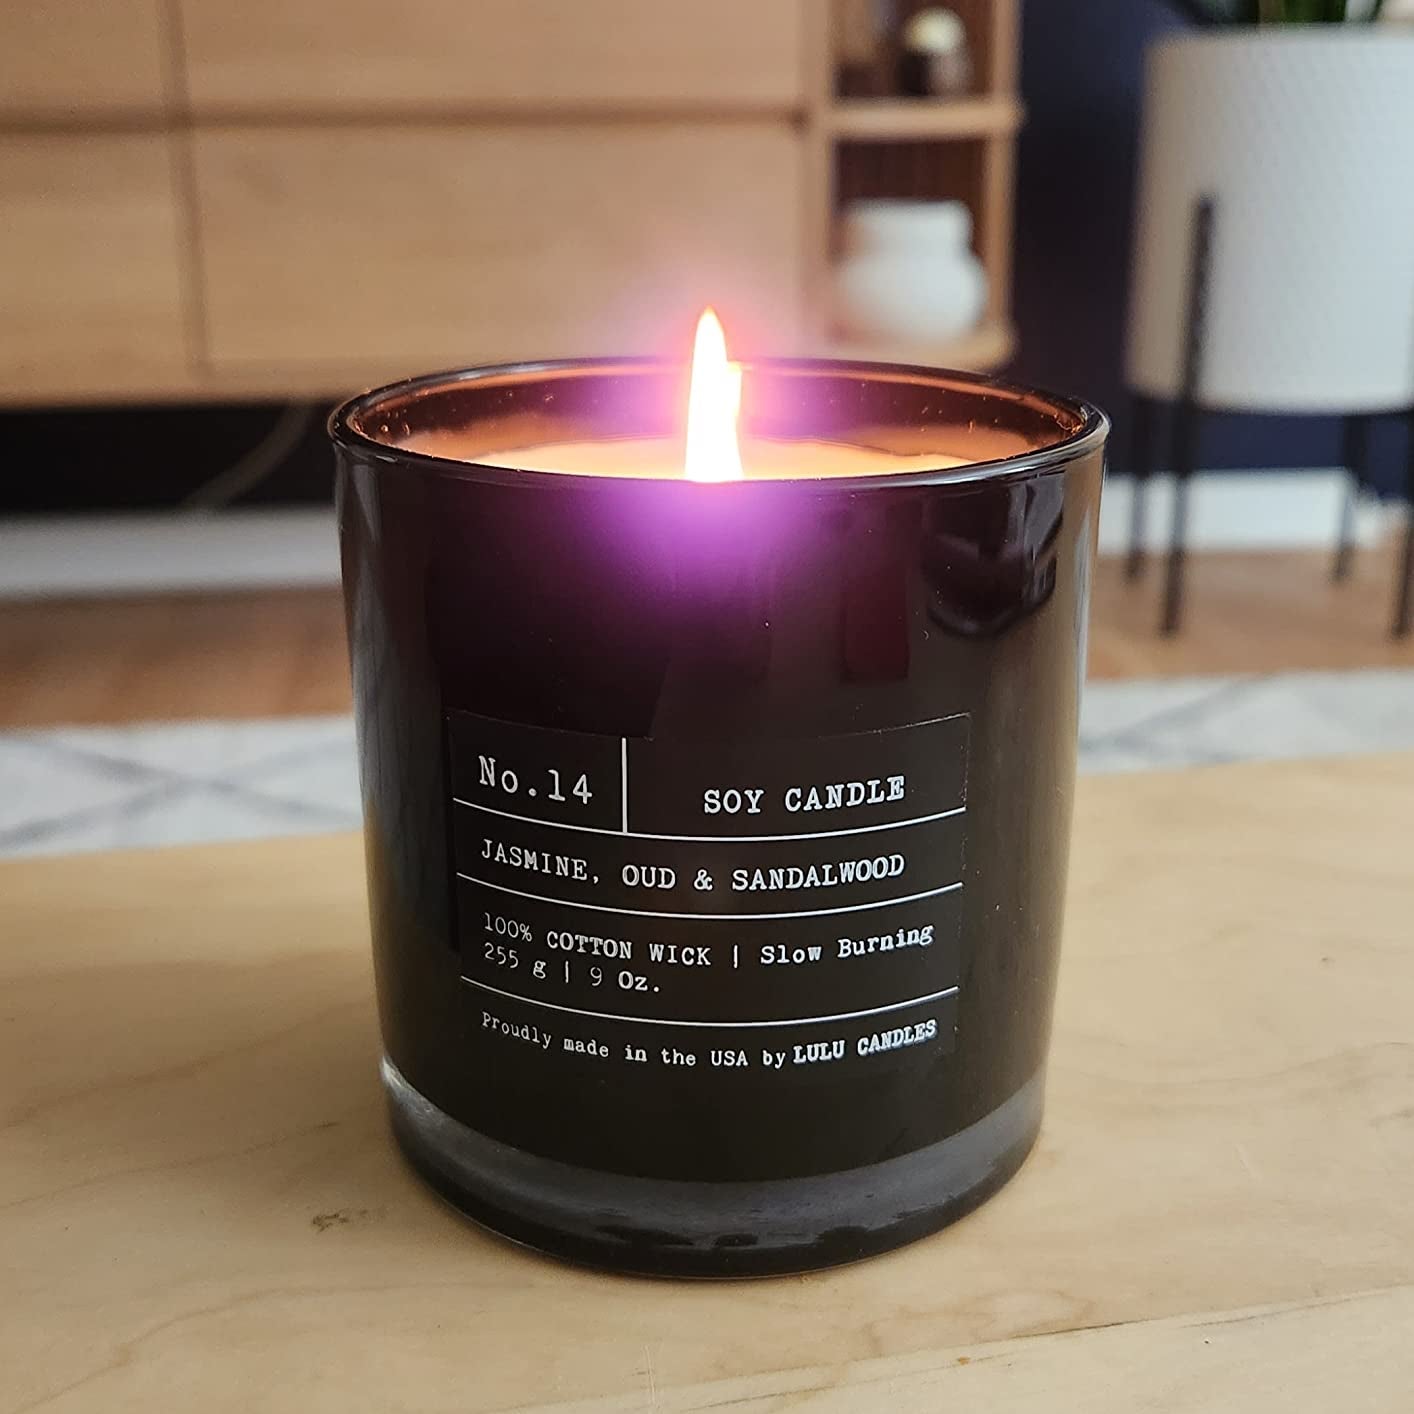 A lit candle with black glass and white type text saying it's a jasmine, oud, and sandalwood scent with a cotton wick 